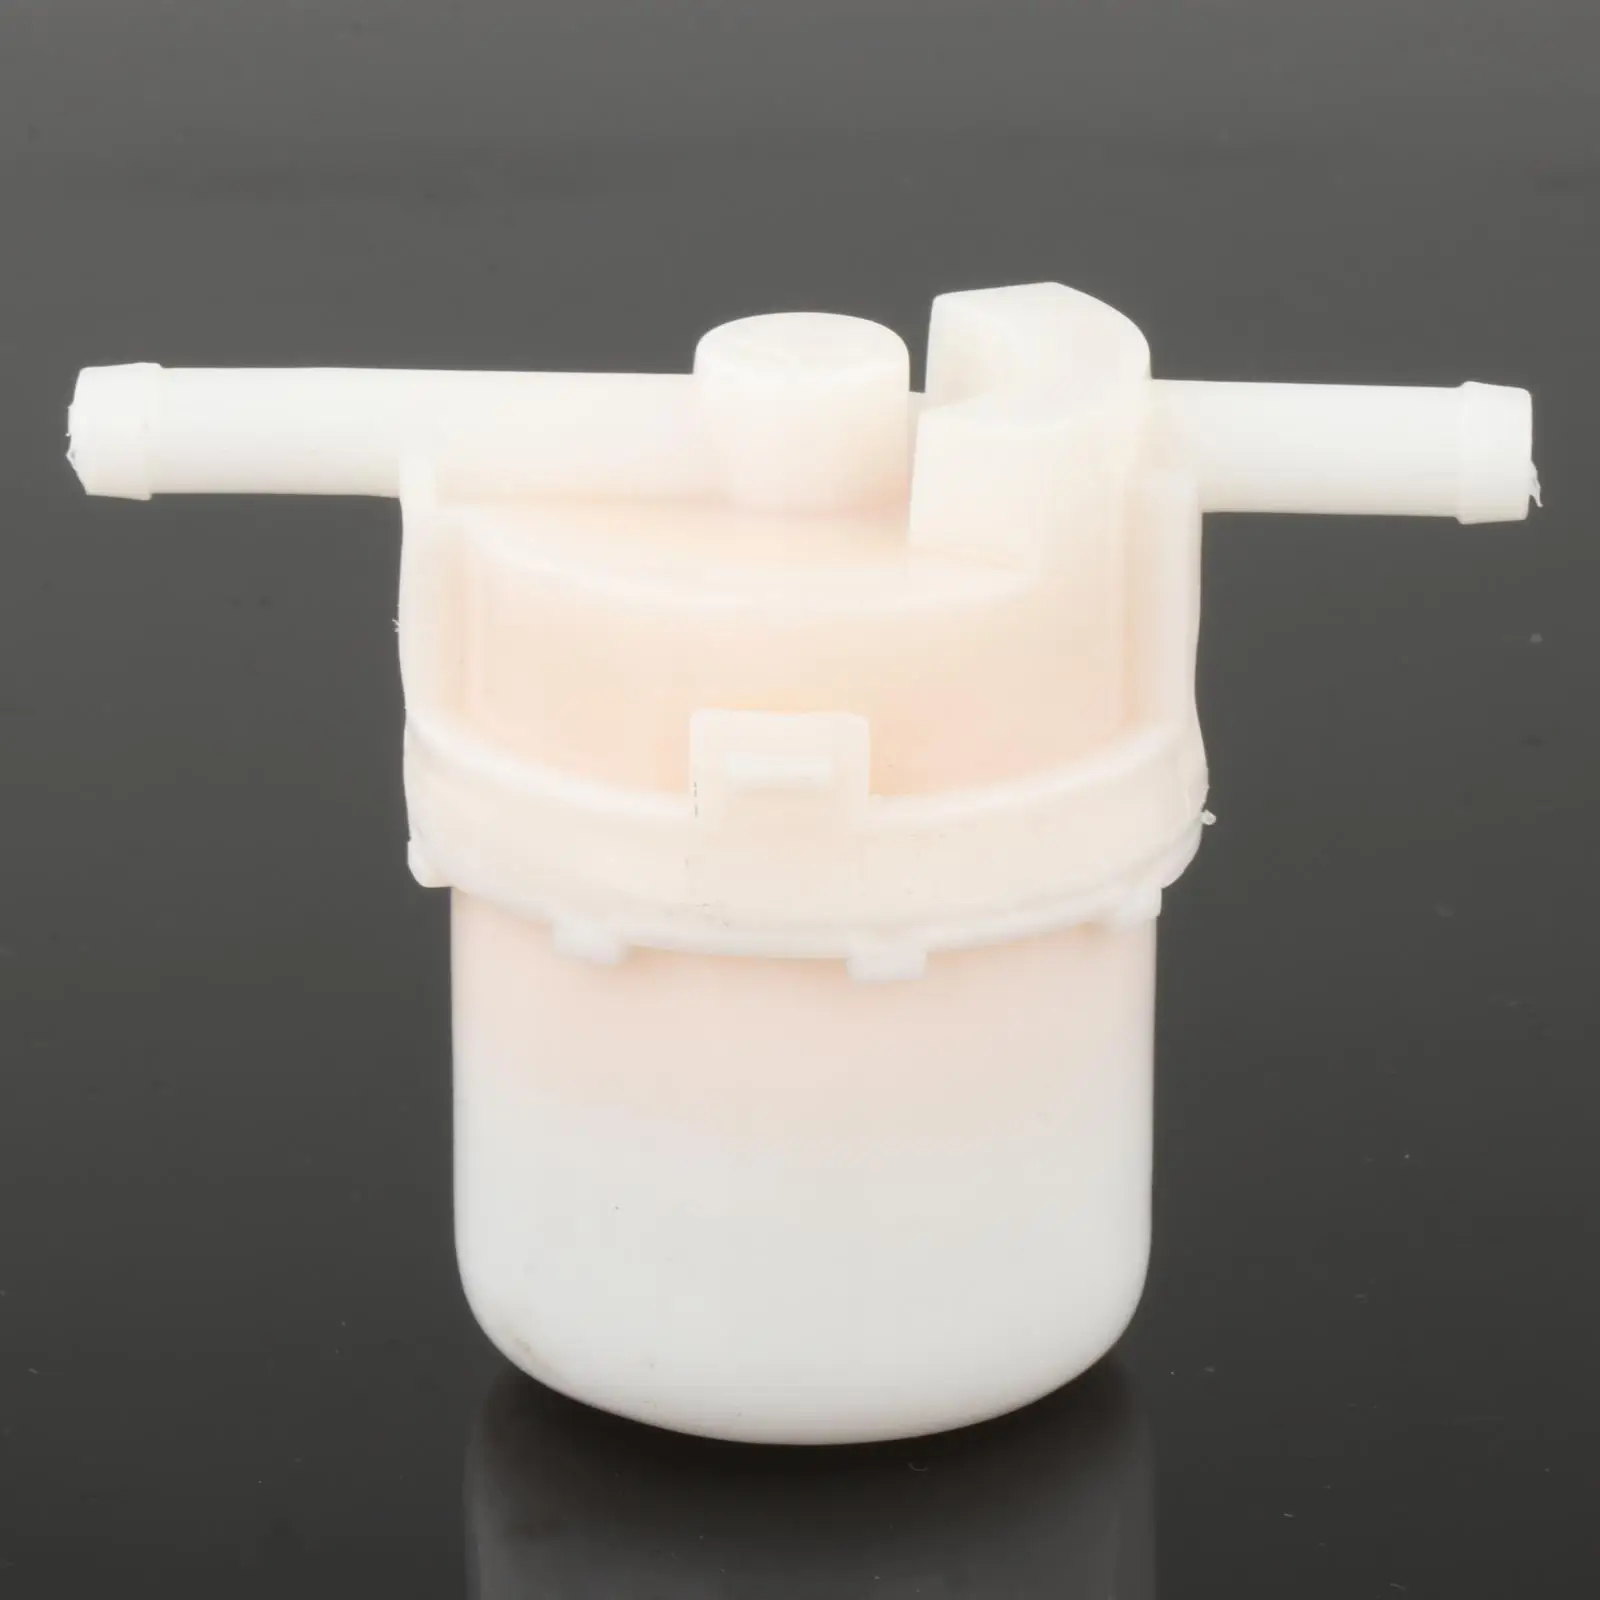 Fuel Filter 16900-Sa5-004 Replacement Plastic Fit for Honda Outboard Parts Accessories Easy to Install Durable Professional